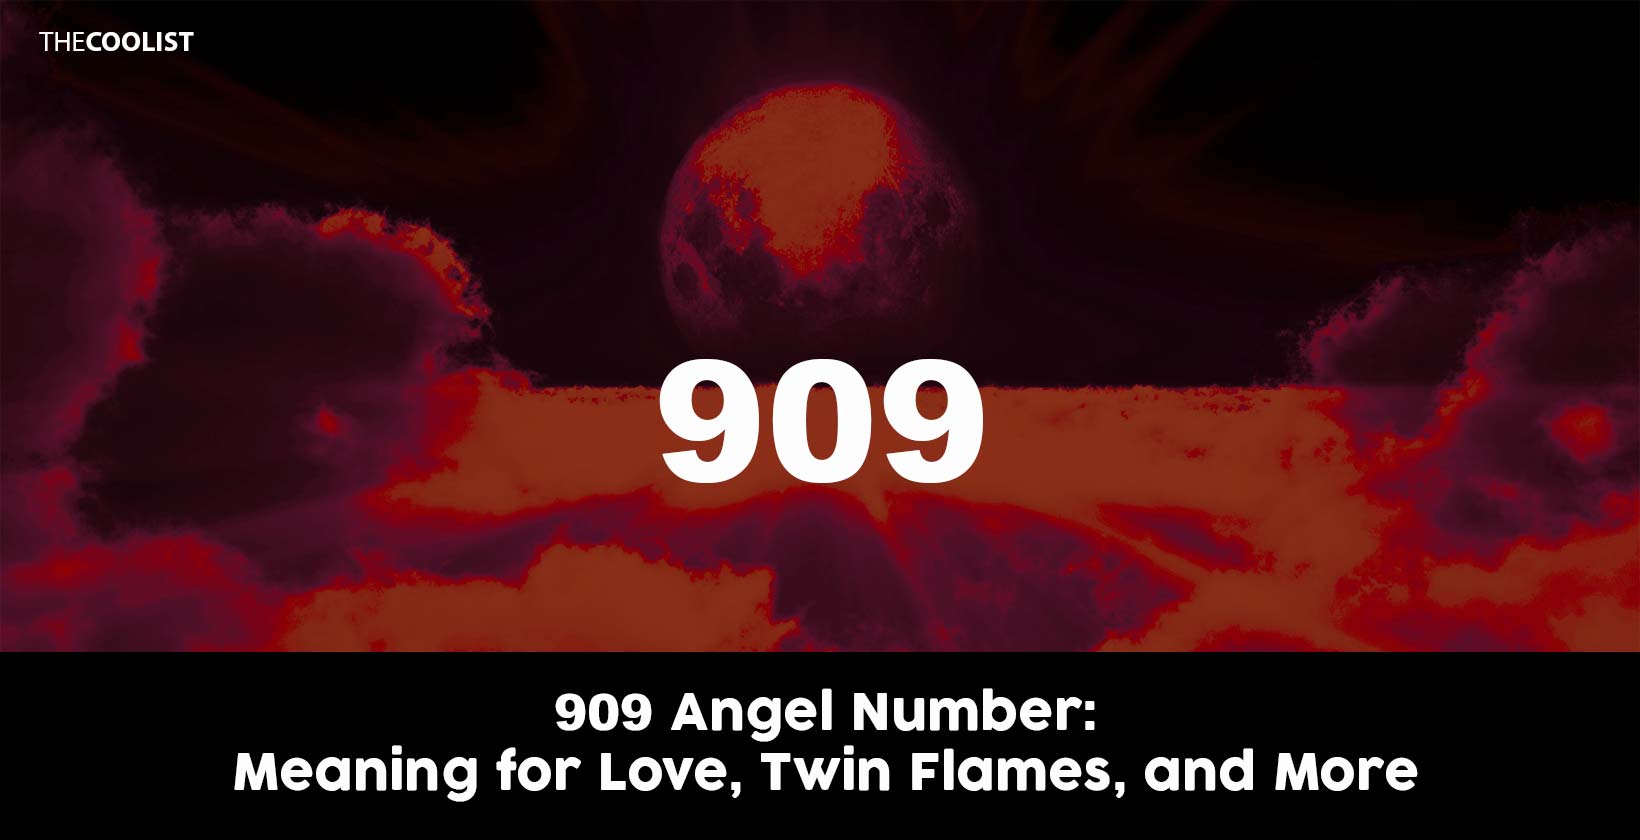 909 Angel Number: Meaning for Love, Twin Flames, and More